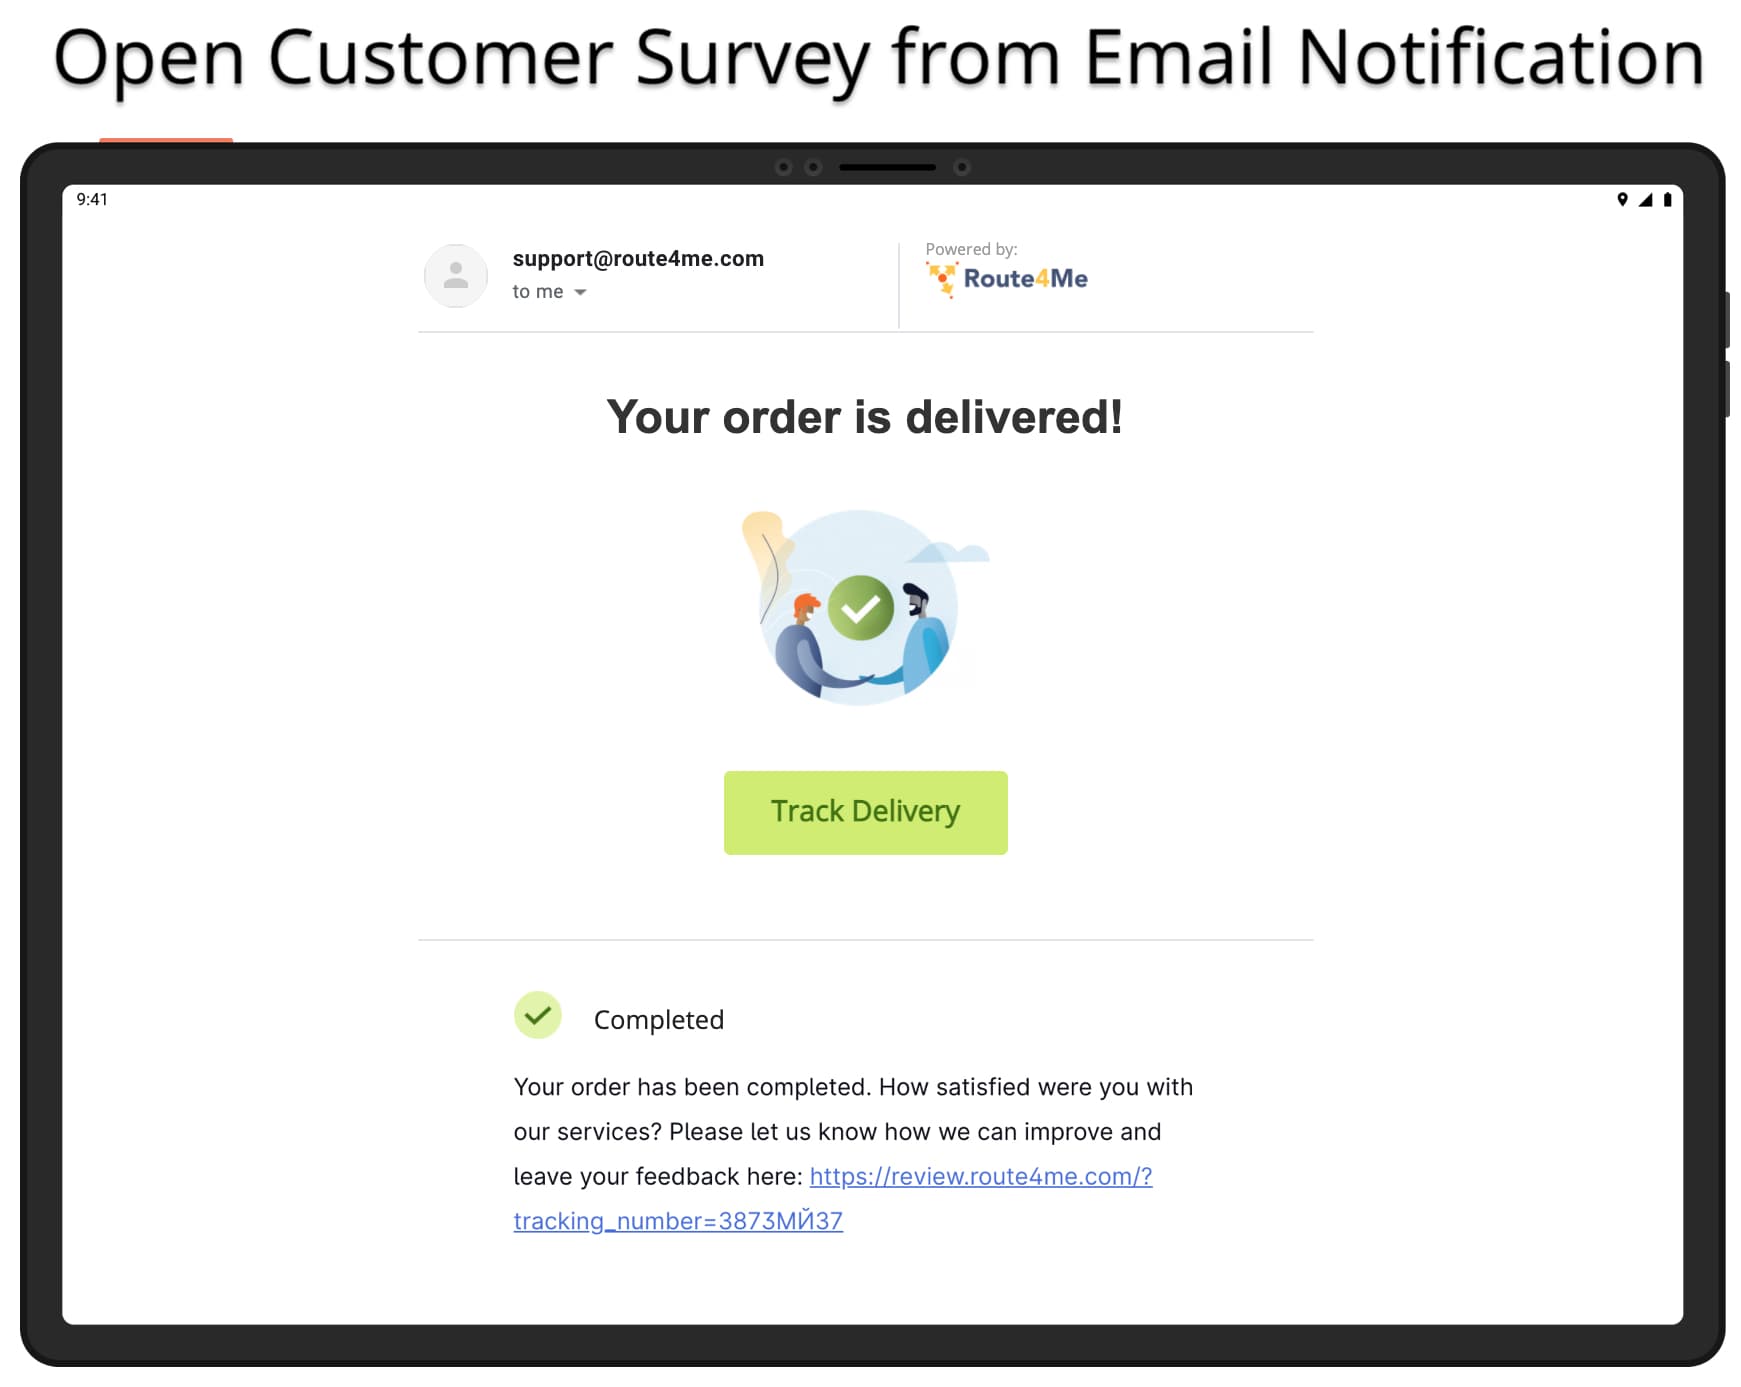 Open driver rating or customer survey page using the link from the email notification.